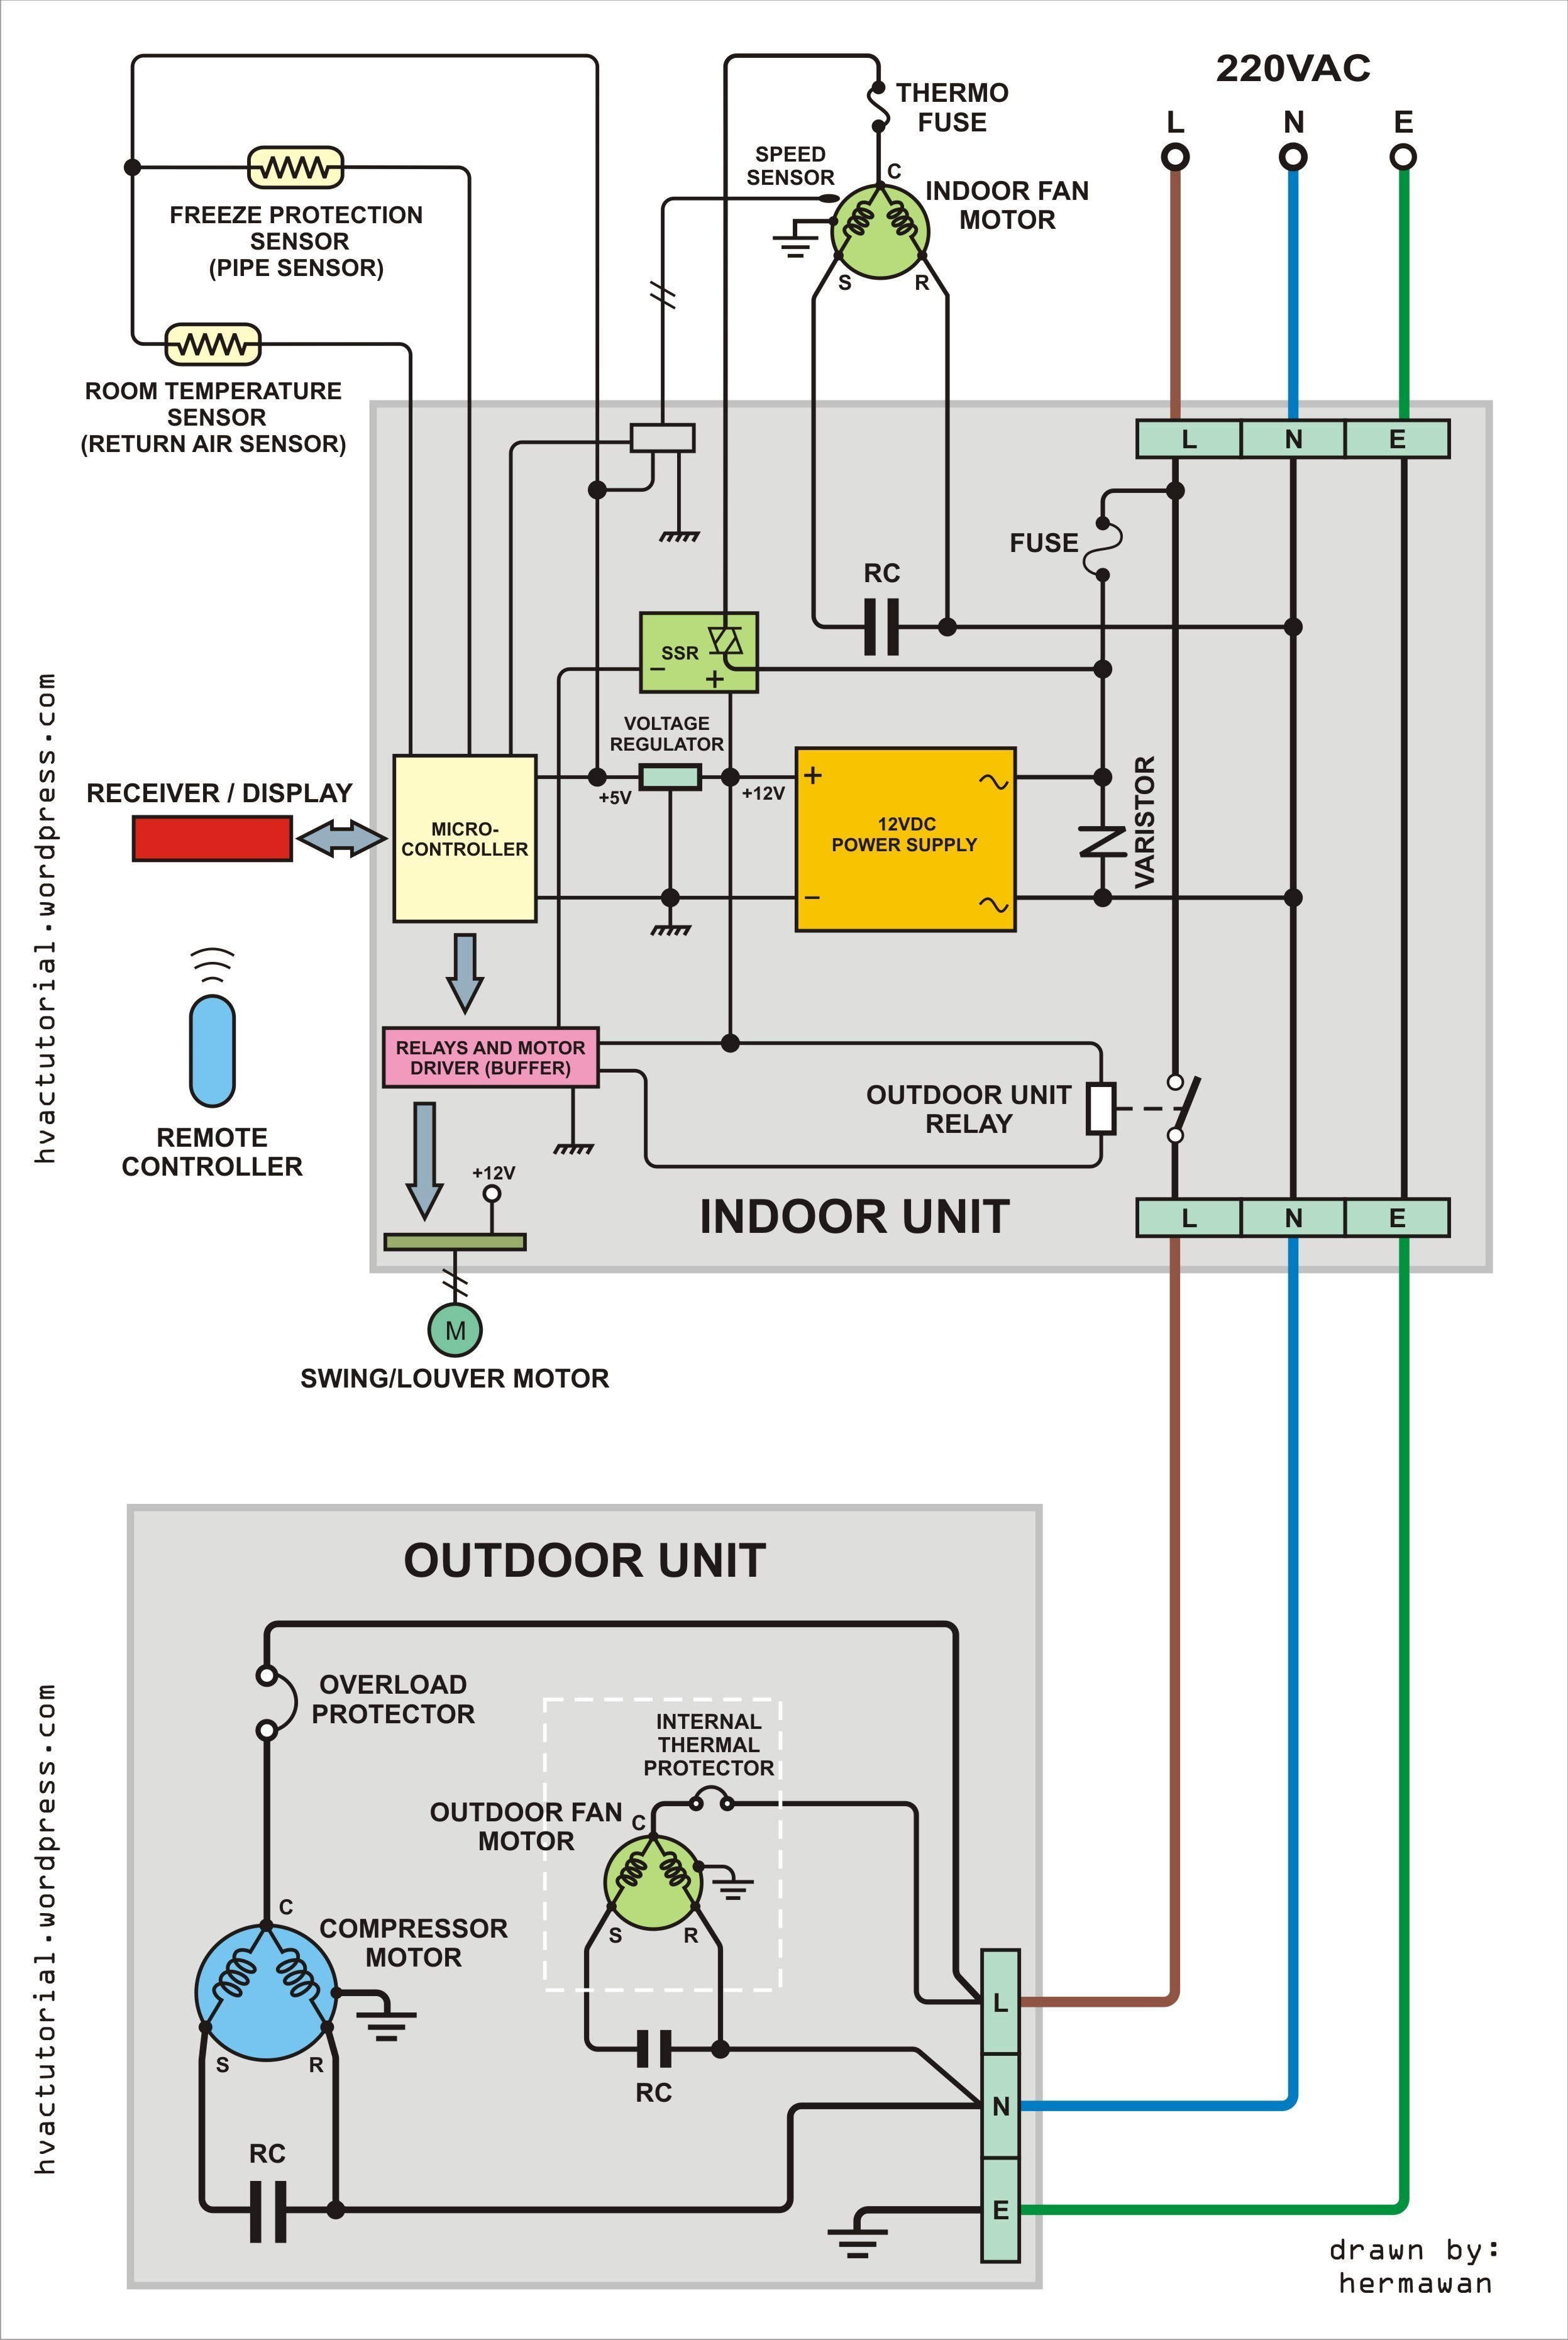 Car Ac Working Diagram Car Diagram Wiring Diagram for Auto Airnditioning New Carnditioner Of Car Ac Working Diagram